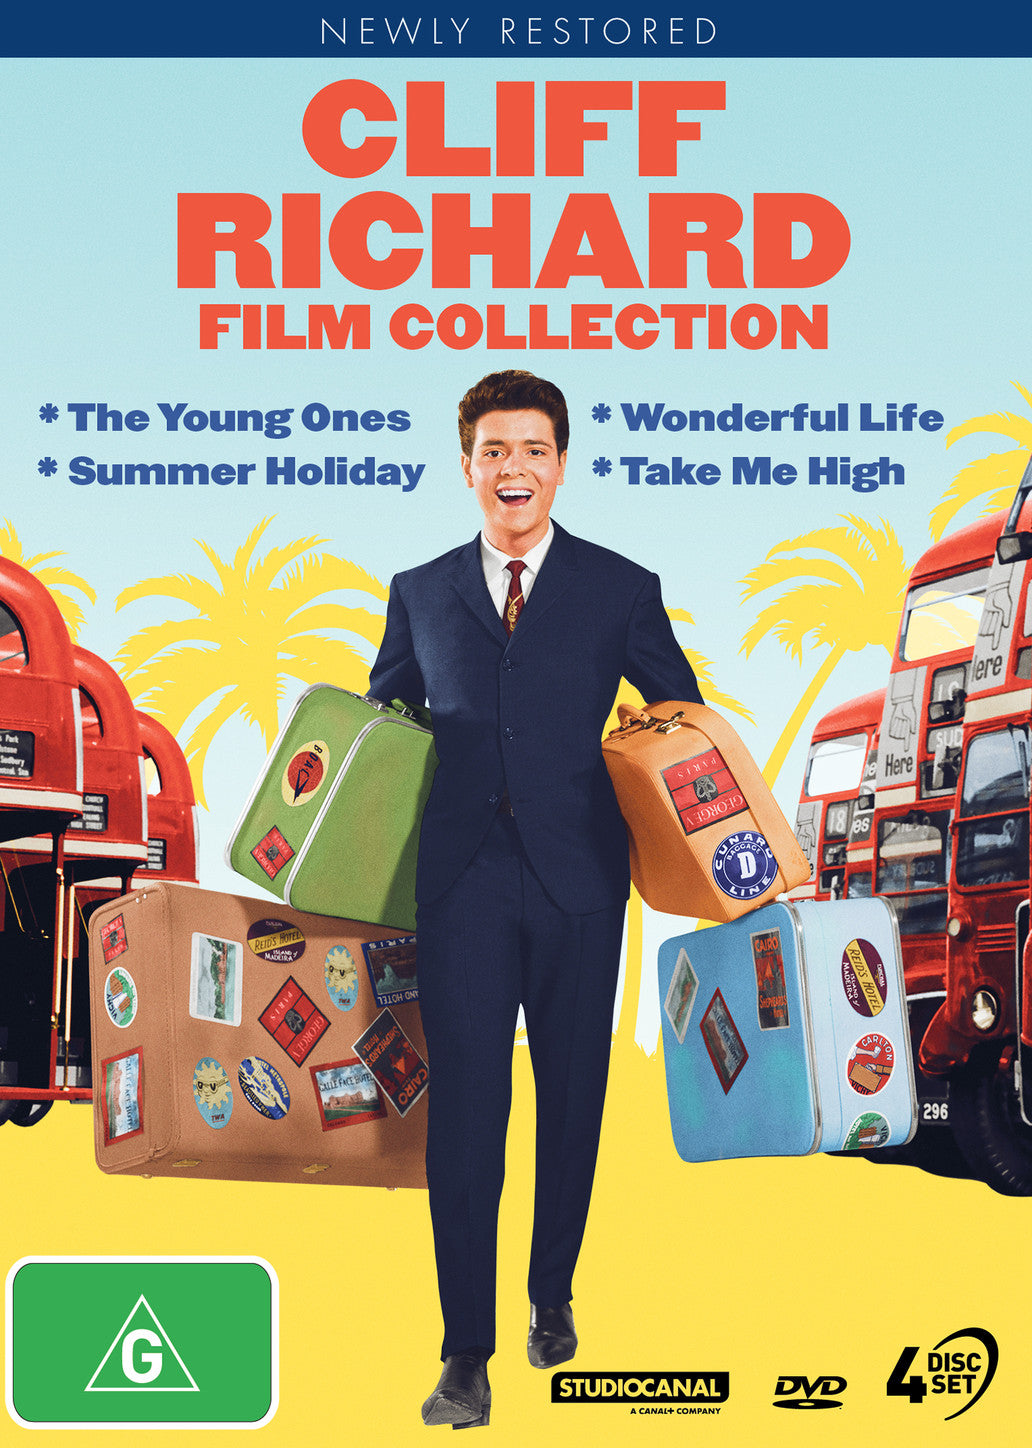 CLIFF RICHARD'S FILM COLLECTION: THE YOUNG ONES, SUMMER HOLIDAY, WONDERFUL LIFE & TAKE ME HIGH